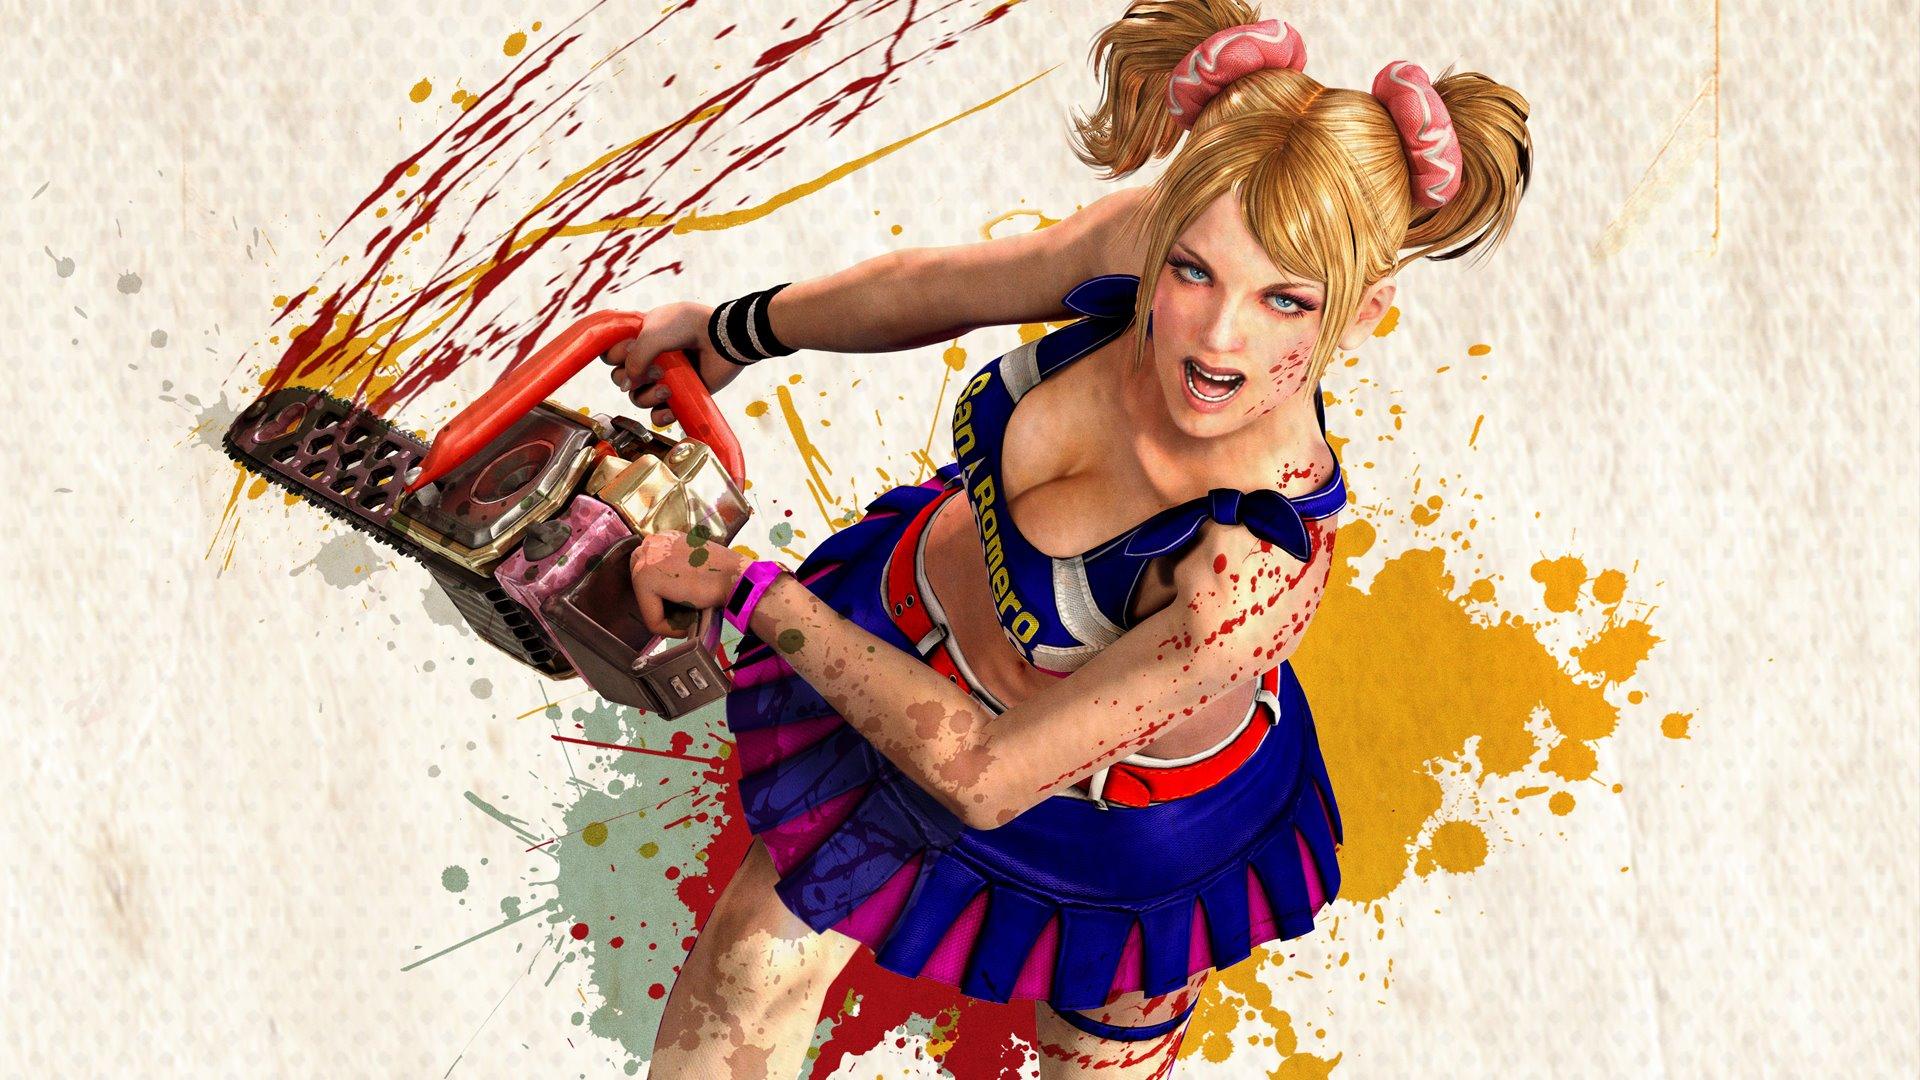 Lollipop Chainsaw Remake will not undergo major changes from the original